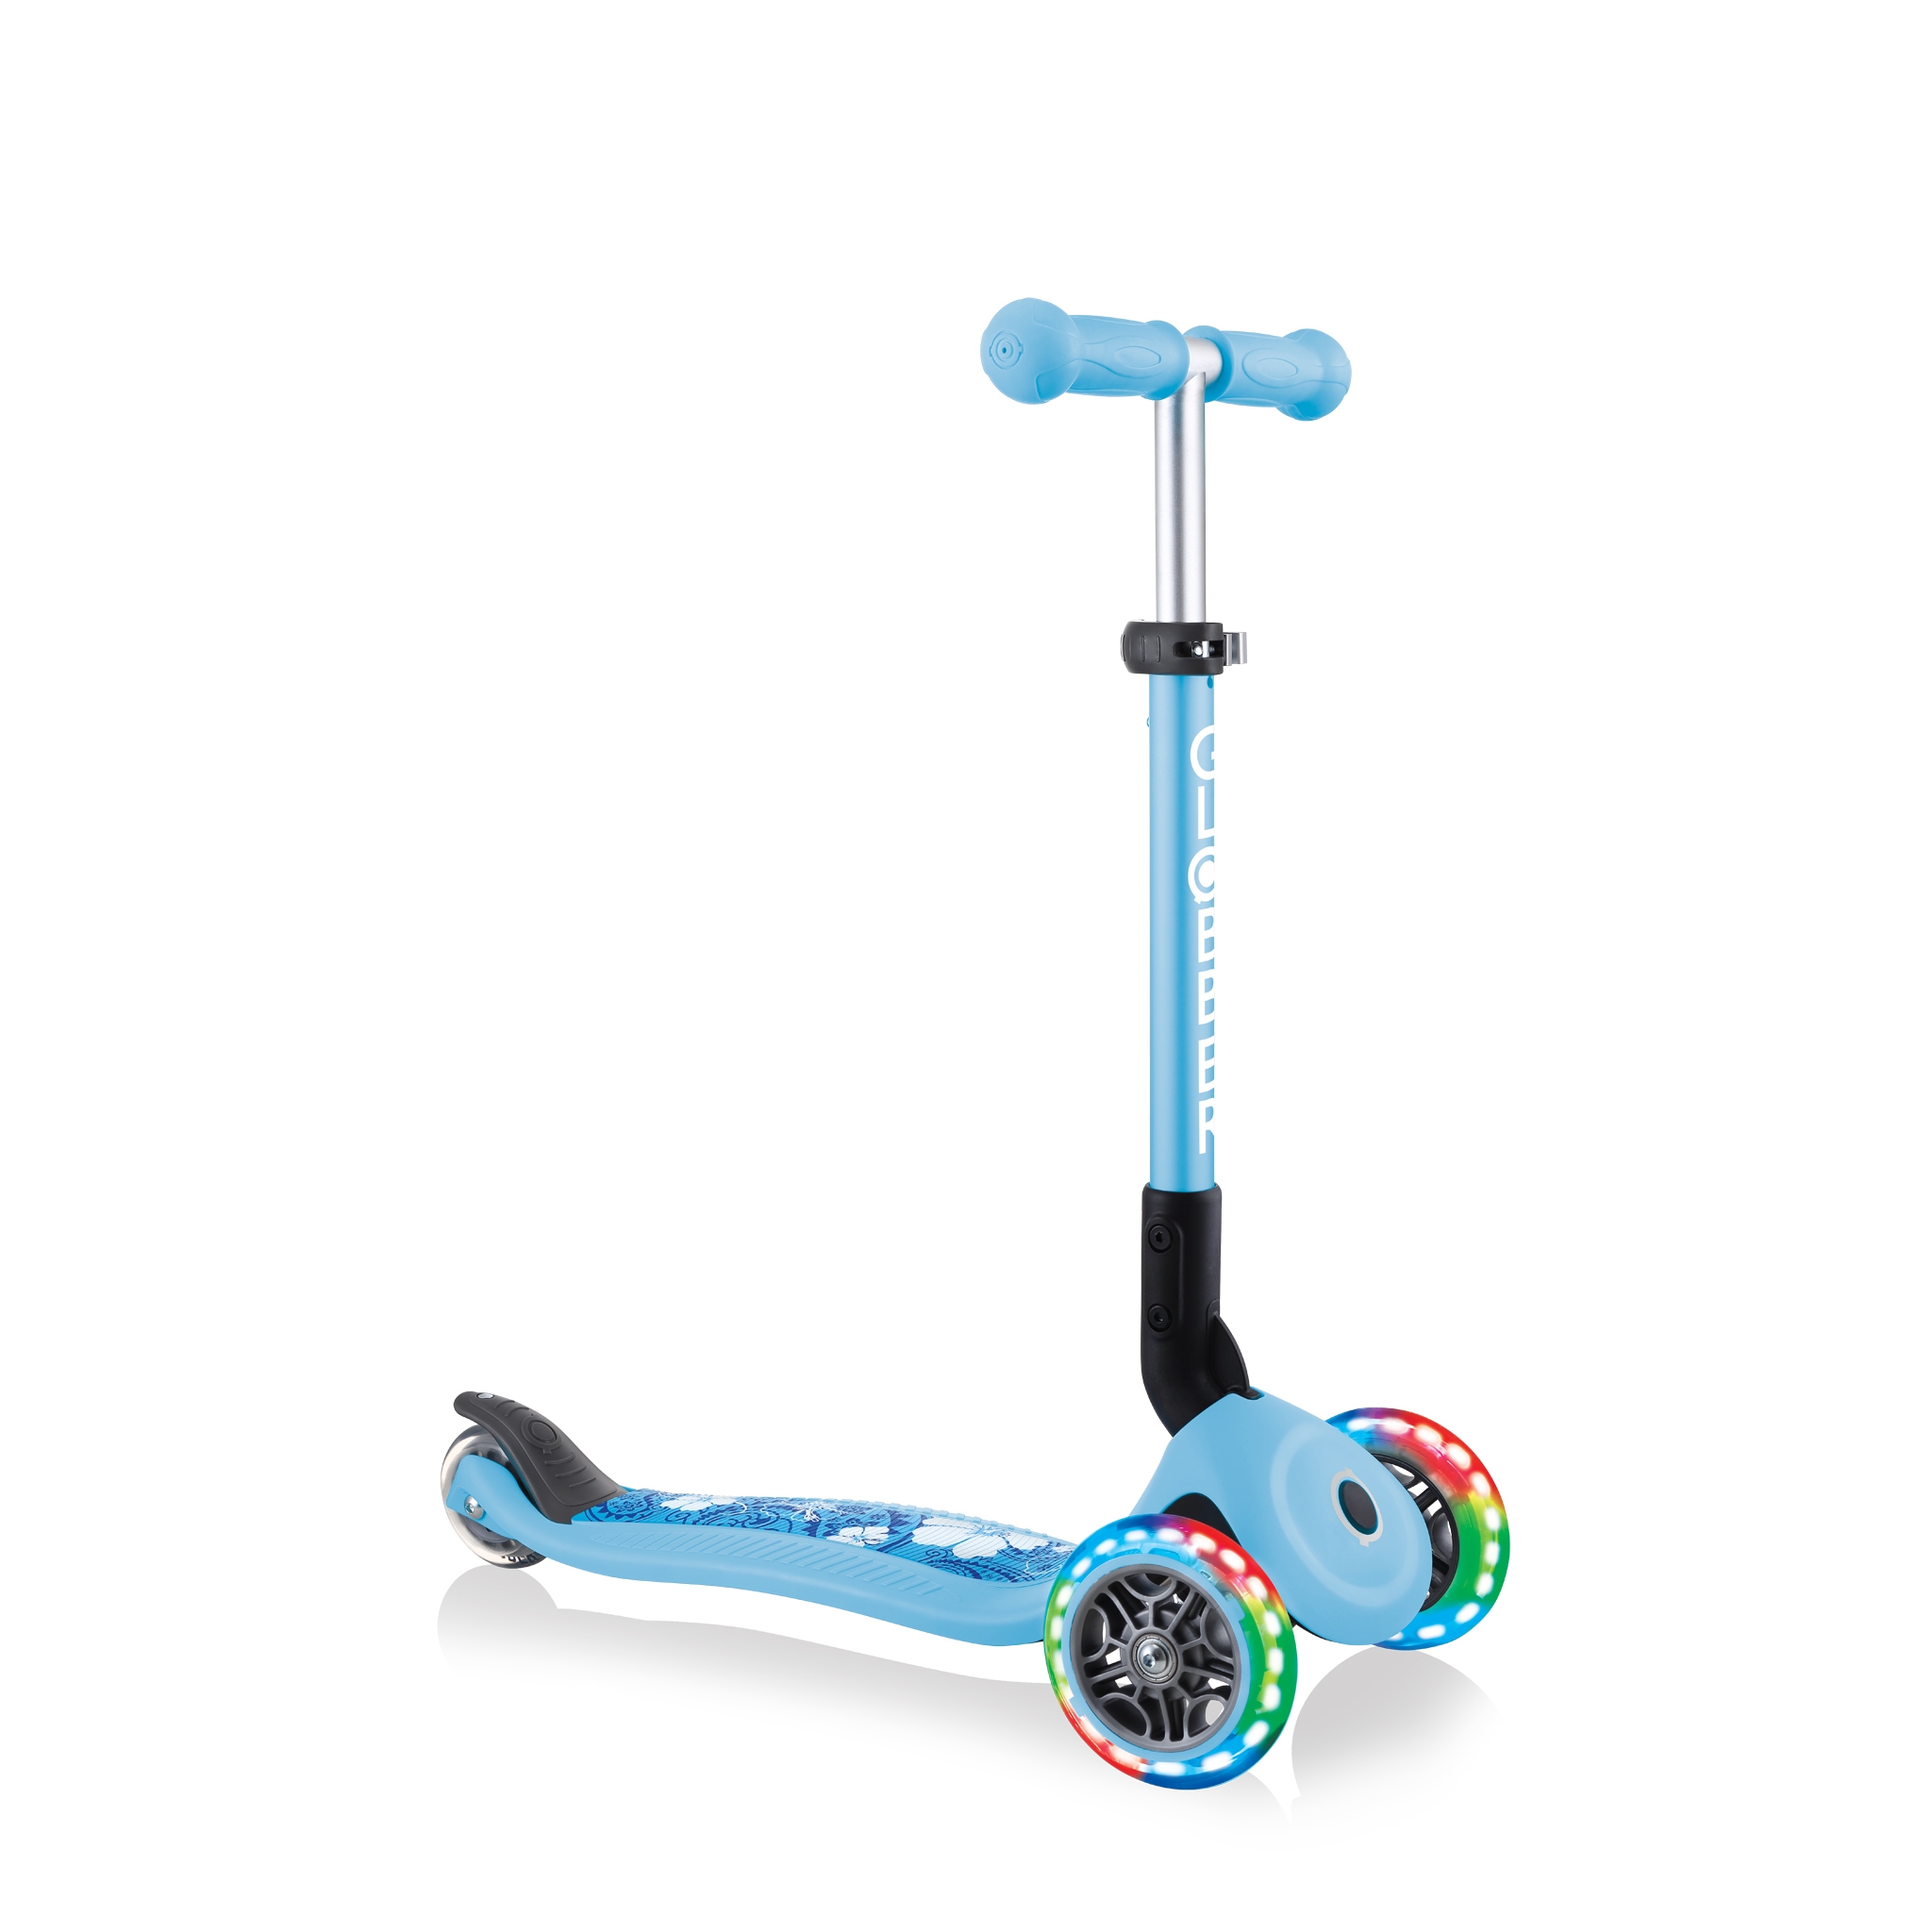 junior-foldable-fantasy-lights-3-wheel-scooter-for-toddlers 0